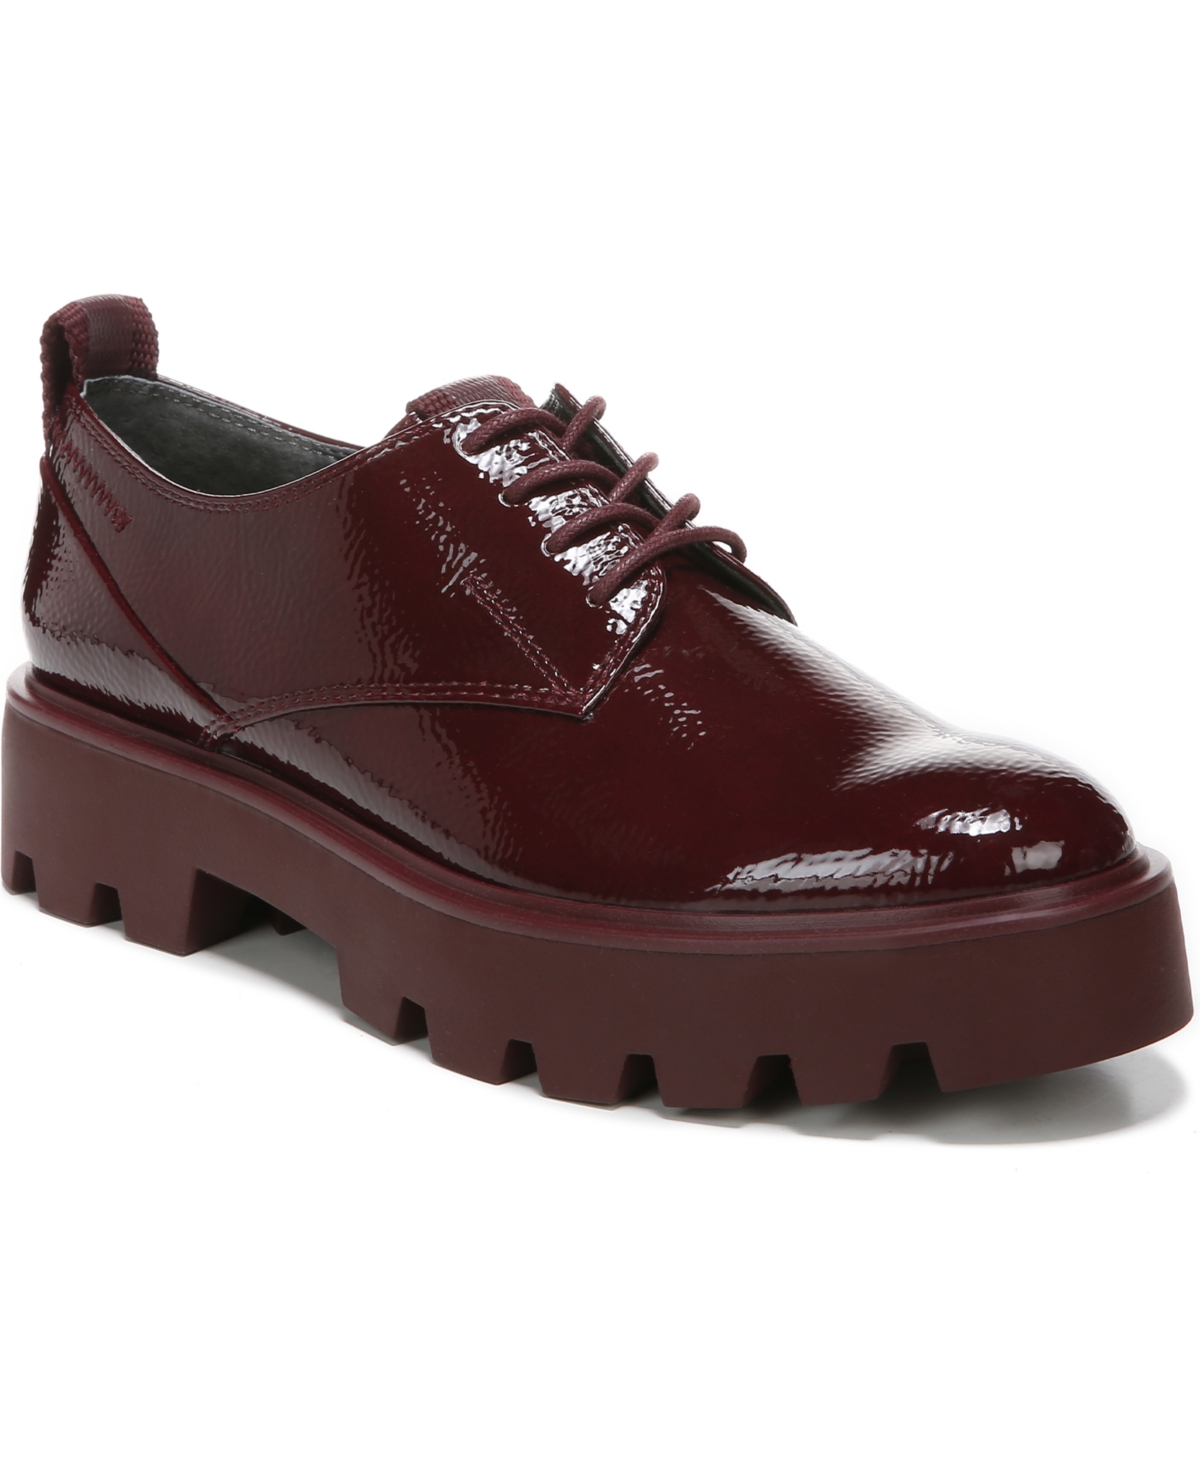 UPC 017138587594 product image for Franco Sarto Balin-Laced Lug Sole Oxfords Women's Shoes | upcitemdb.com